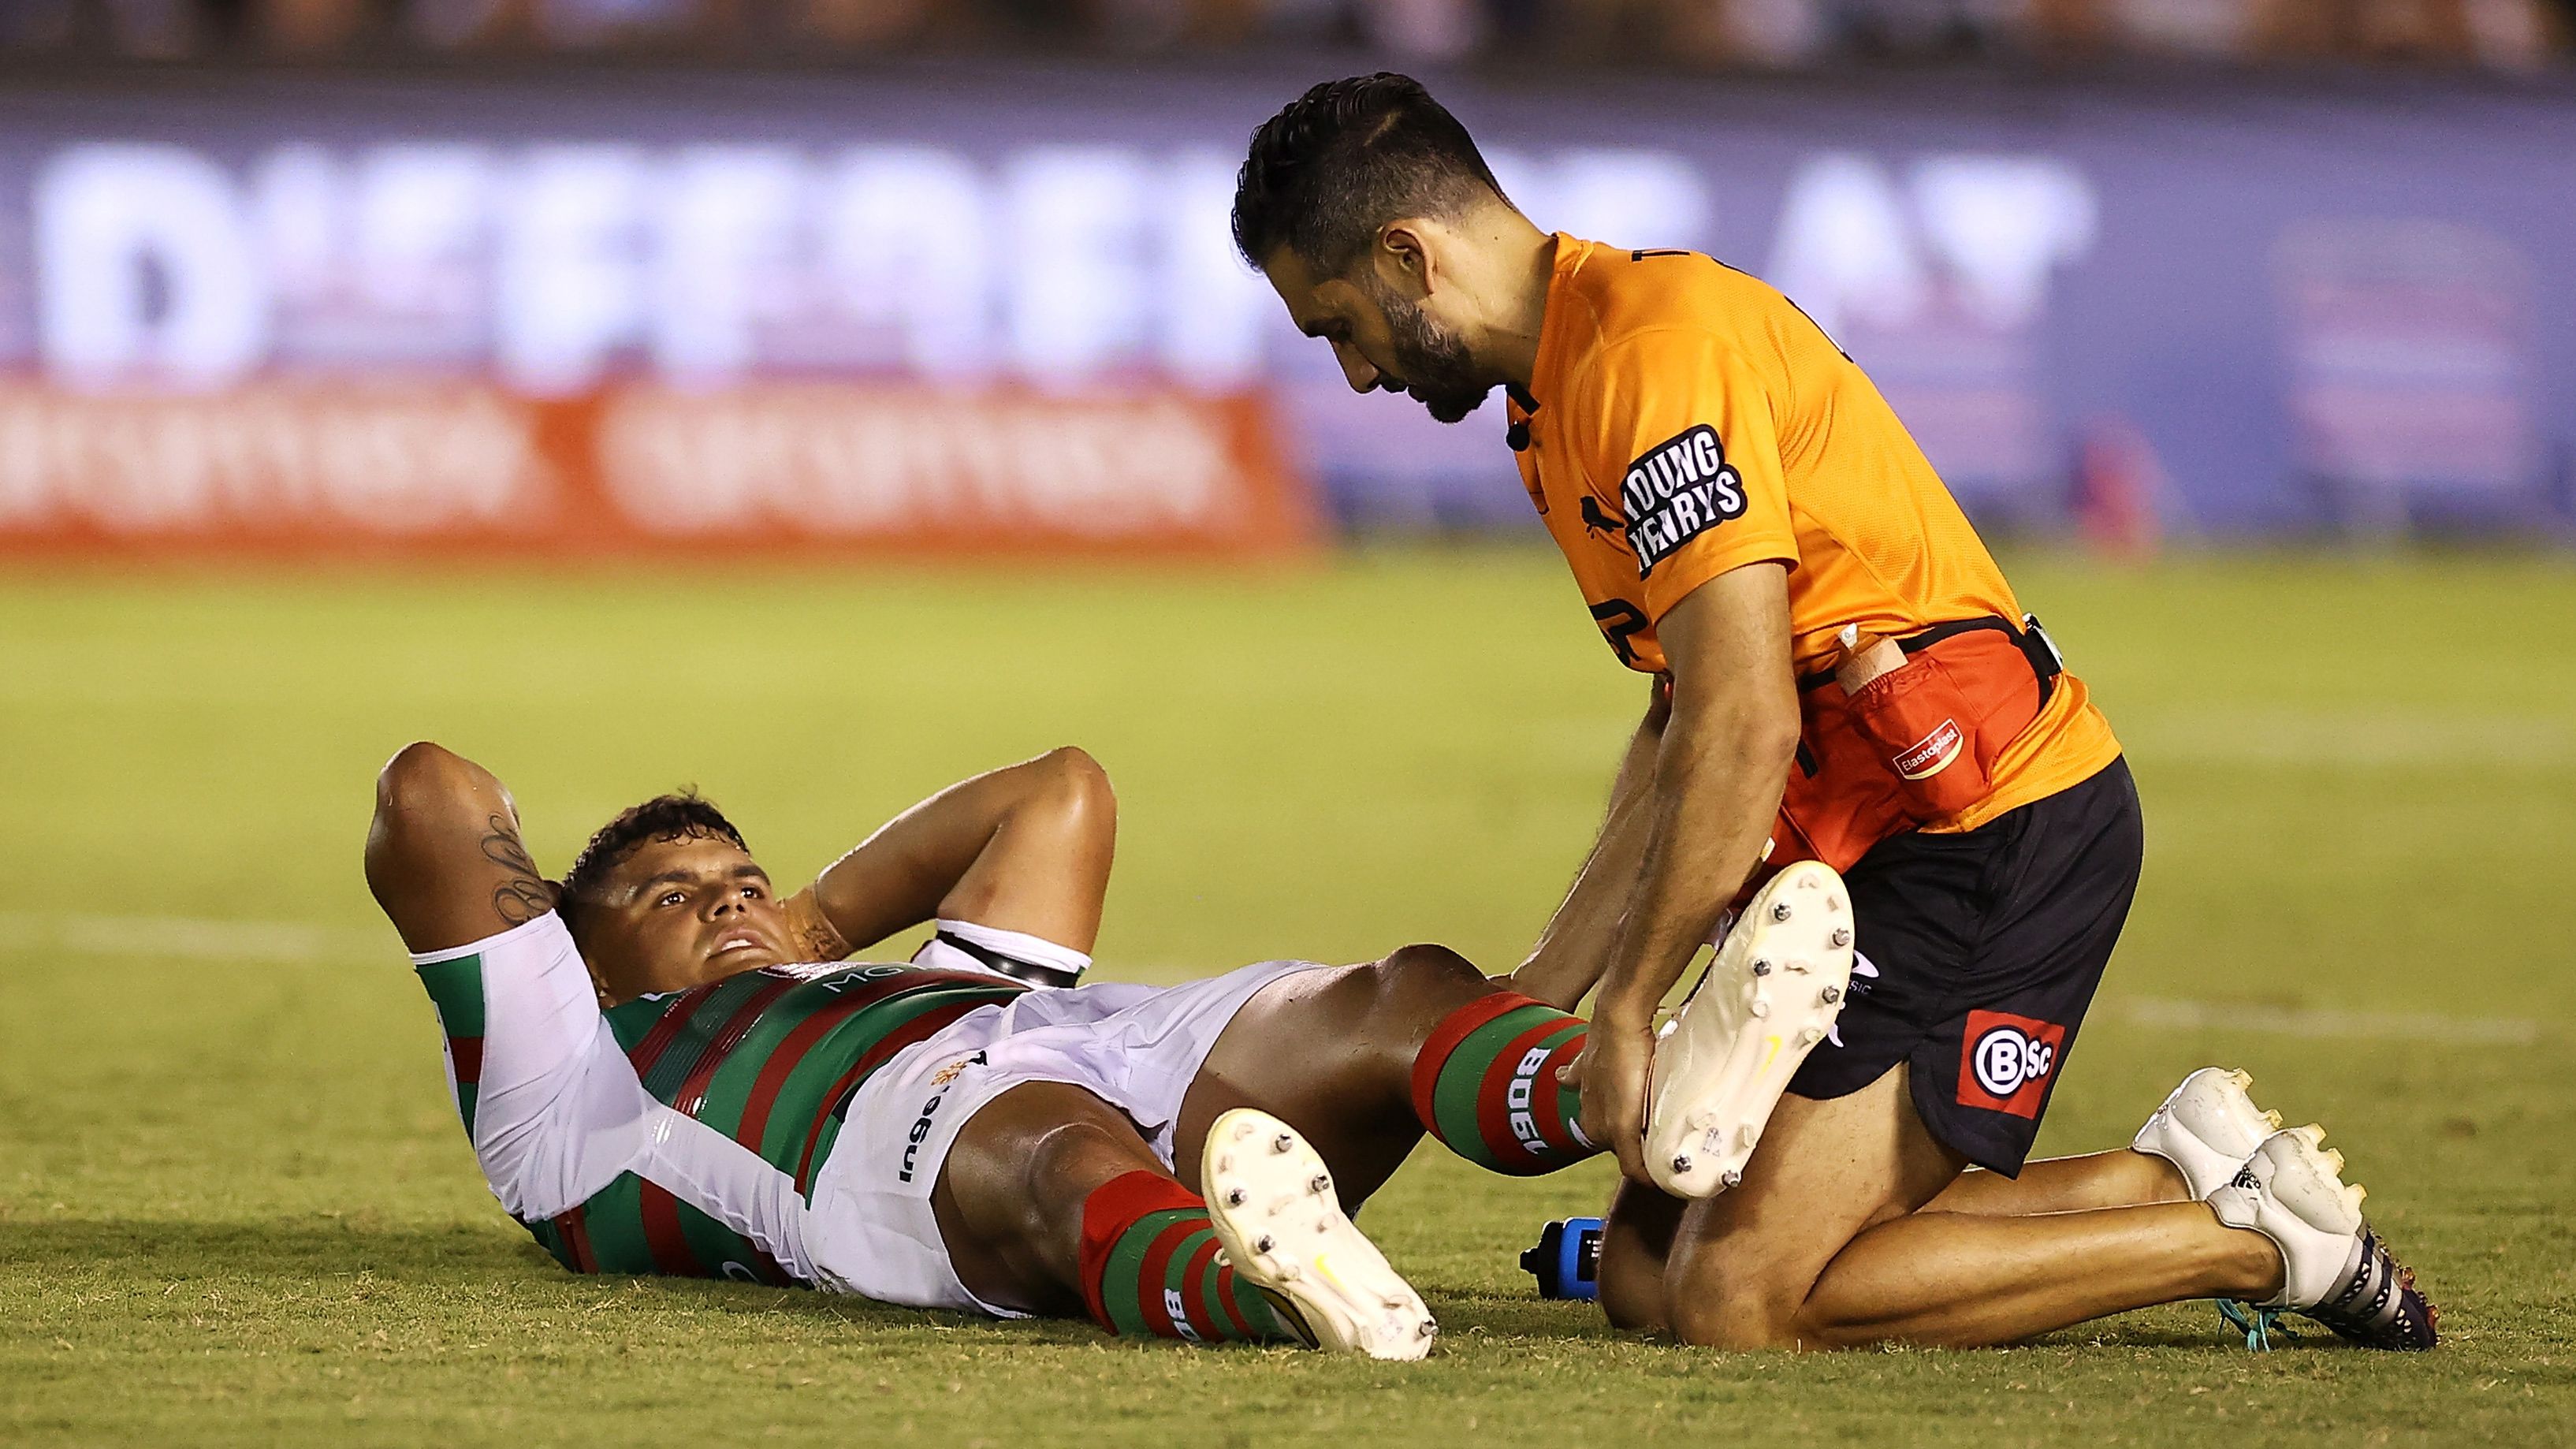 Rabbitohs coach reveals Latrell Mitchell dealing with 'a bit of an issue' in left knee